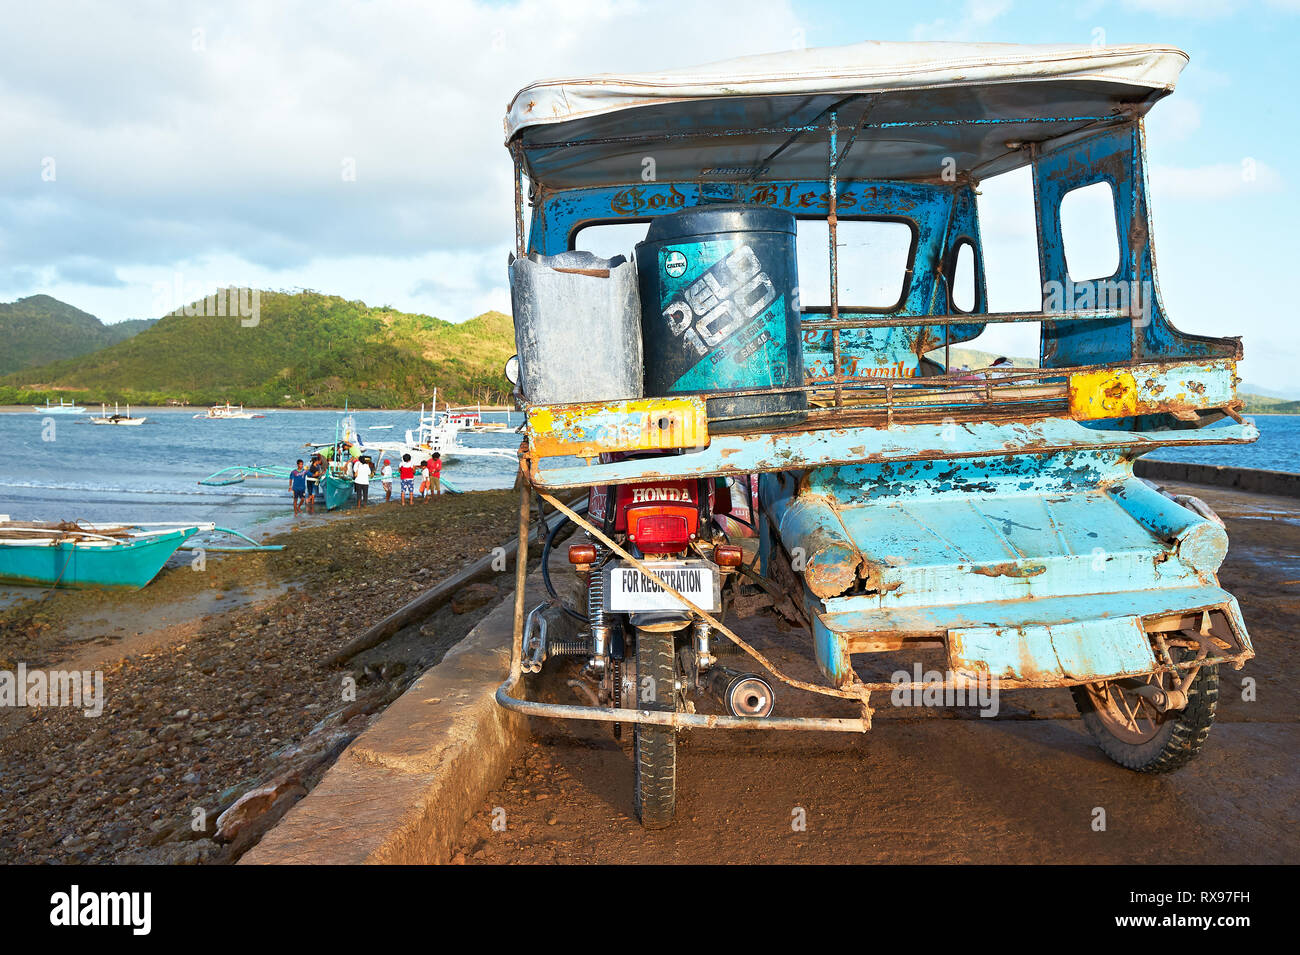 Taytay, Palawan Province, Philippines: Rear view of a blue colored old tricycle parking at a fishermen area late afternoon Stock Photo